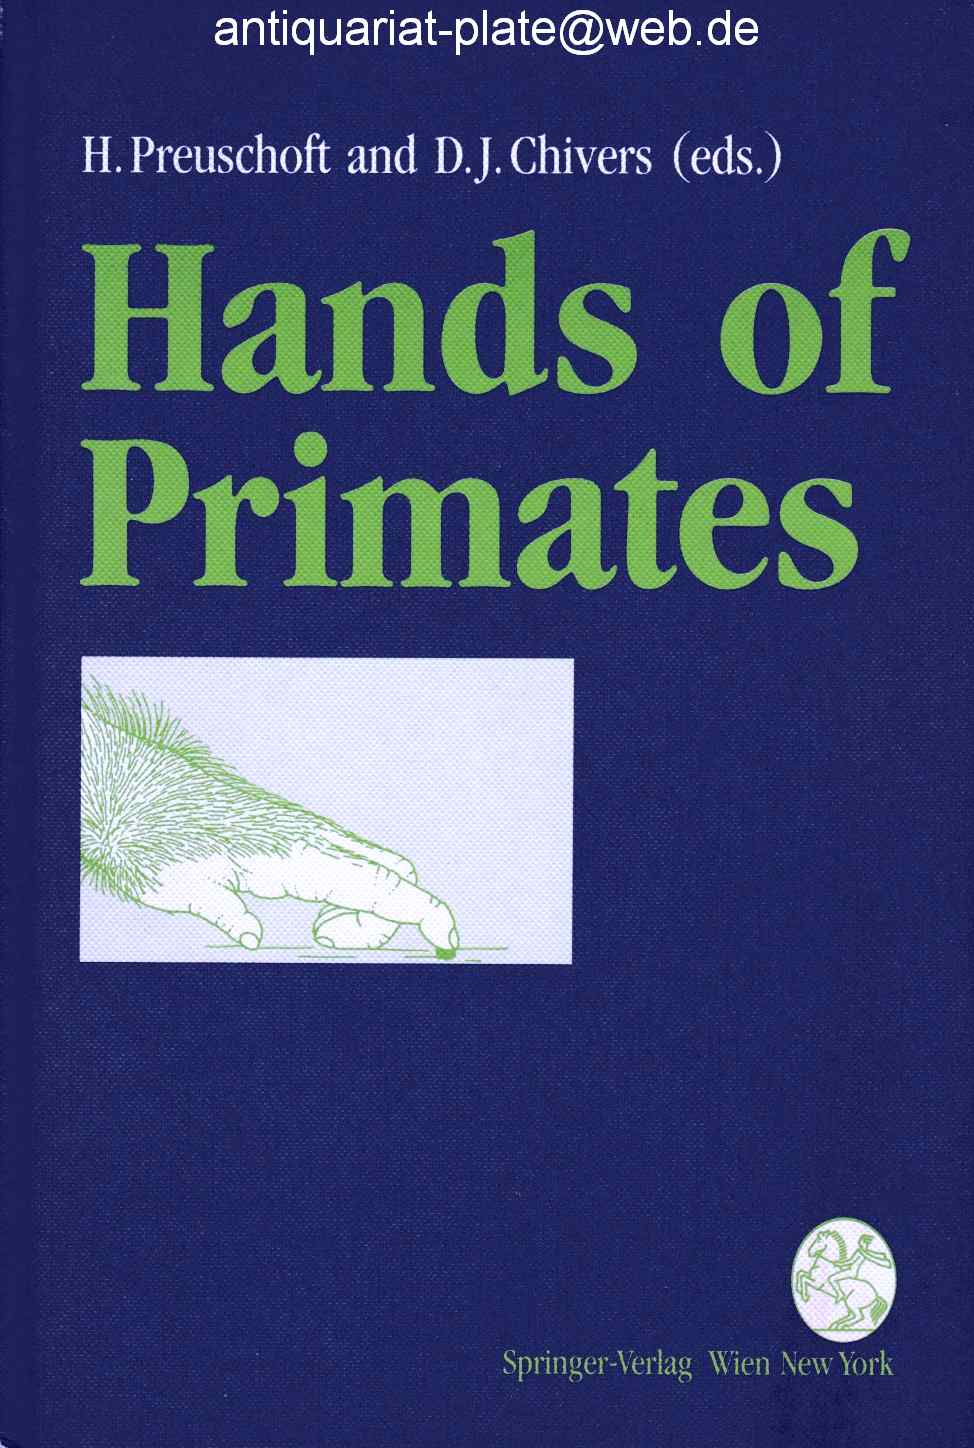 Hands of Primates. - Preuschoft, Holger and Chivers, David J.